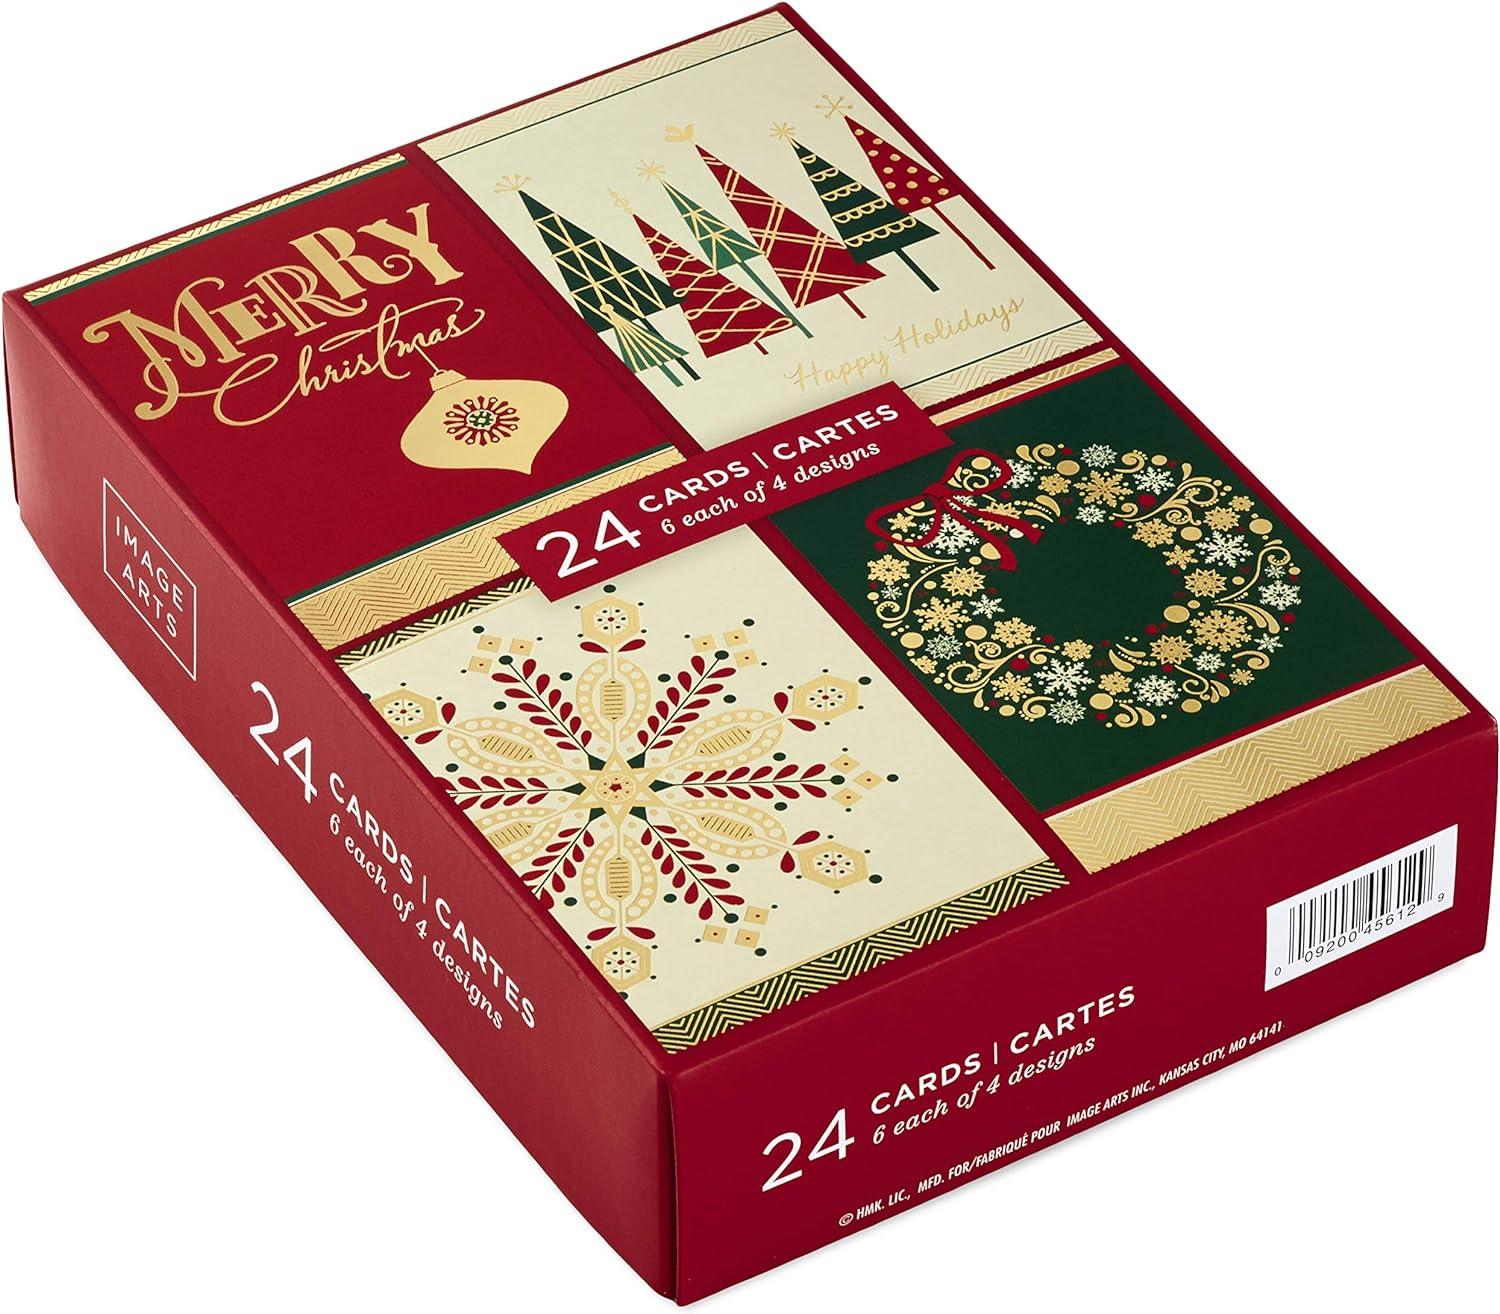 Hallmark Image Arts Boxed Christmas Cards Assortment 24 Pack for $6.35